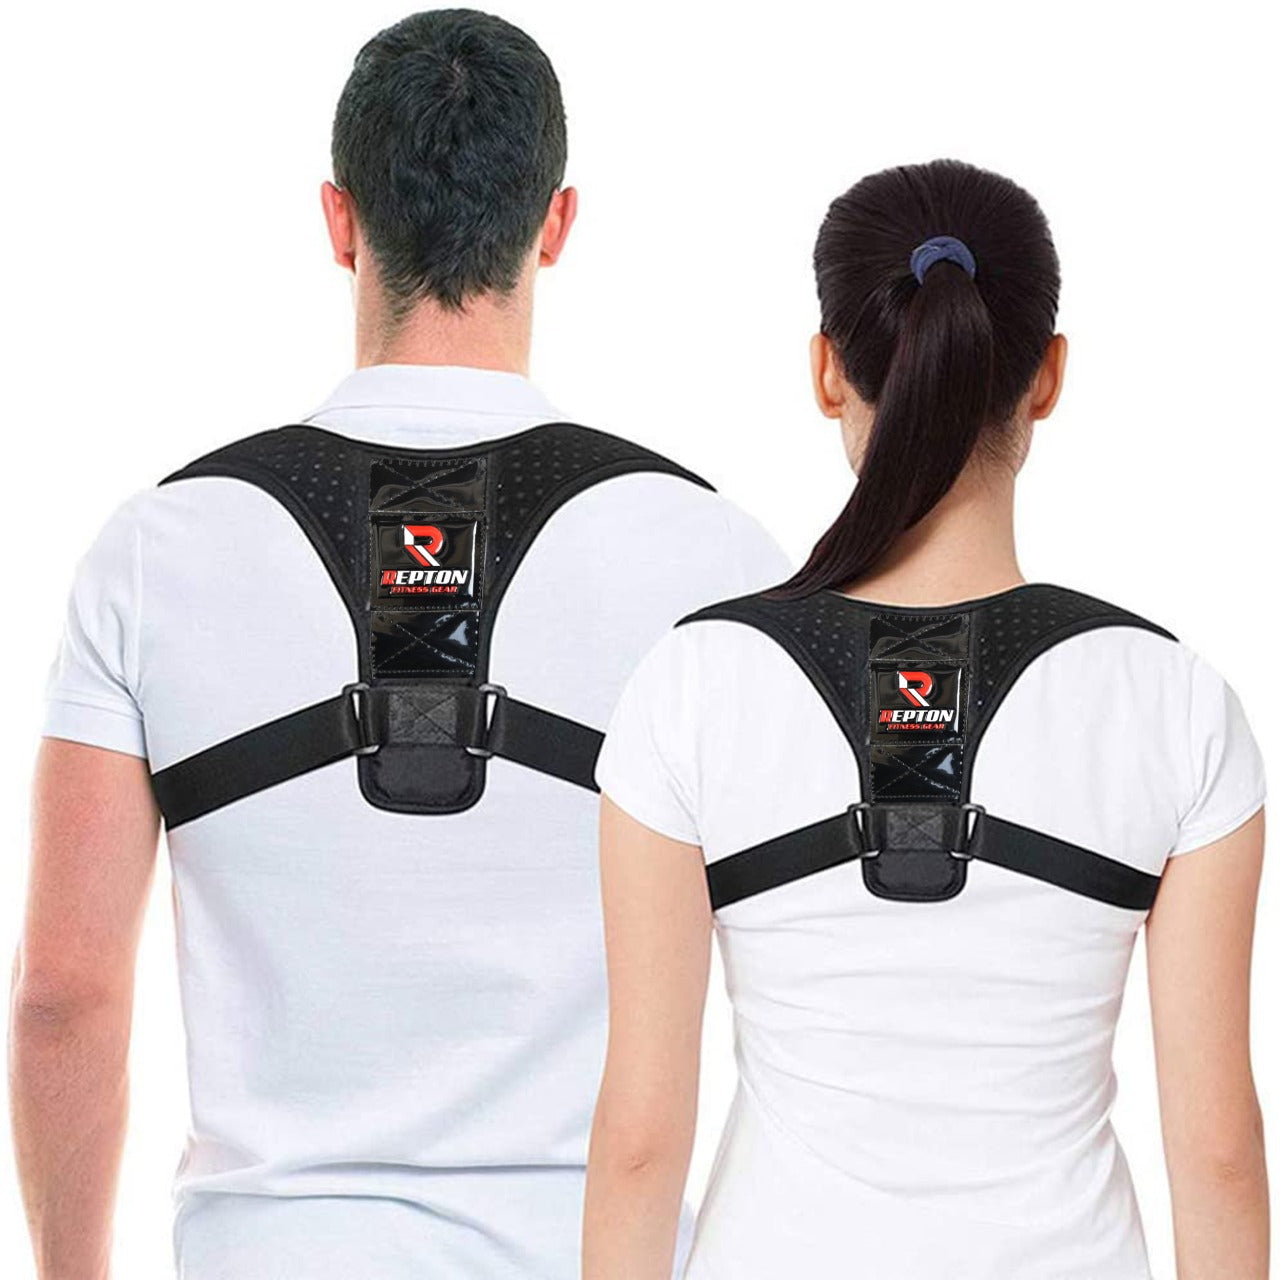 Posture Corrector For Men And Women Adjustable Upper Back Brace Clavicle Support Repton Fitness Gear